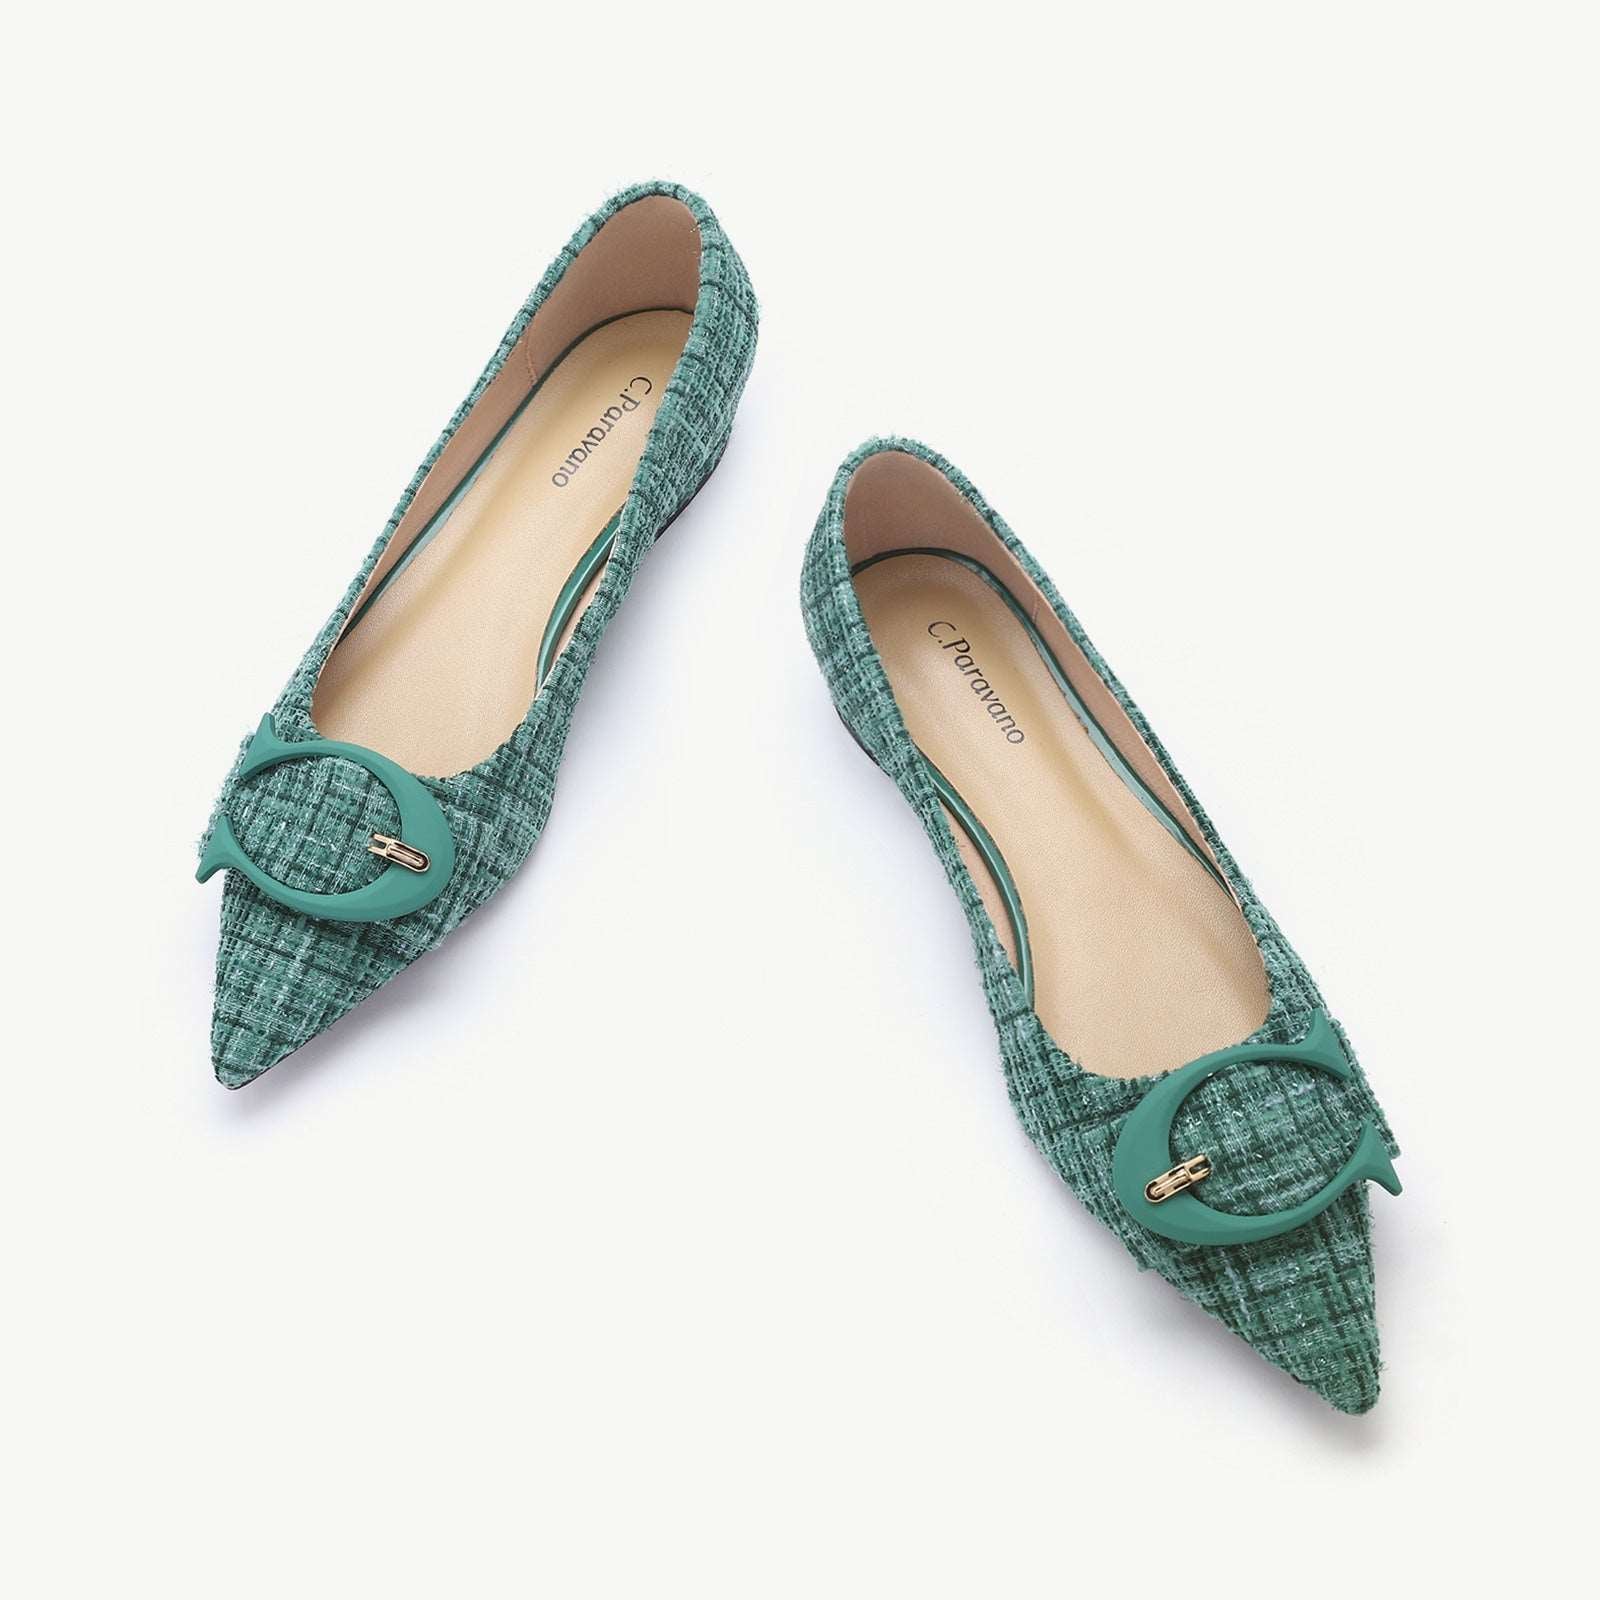 C Buckled Pointed Toe Tweed Flats